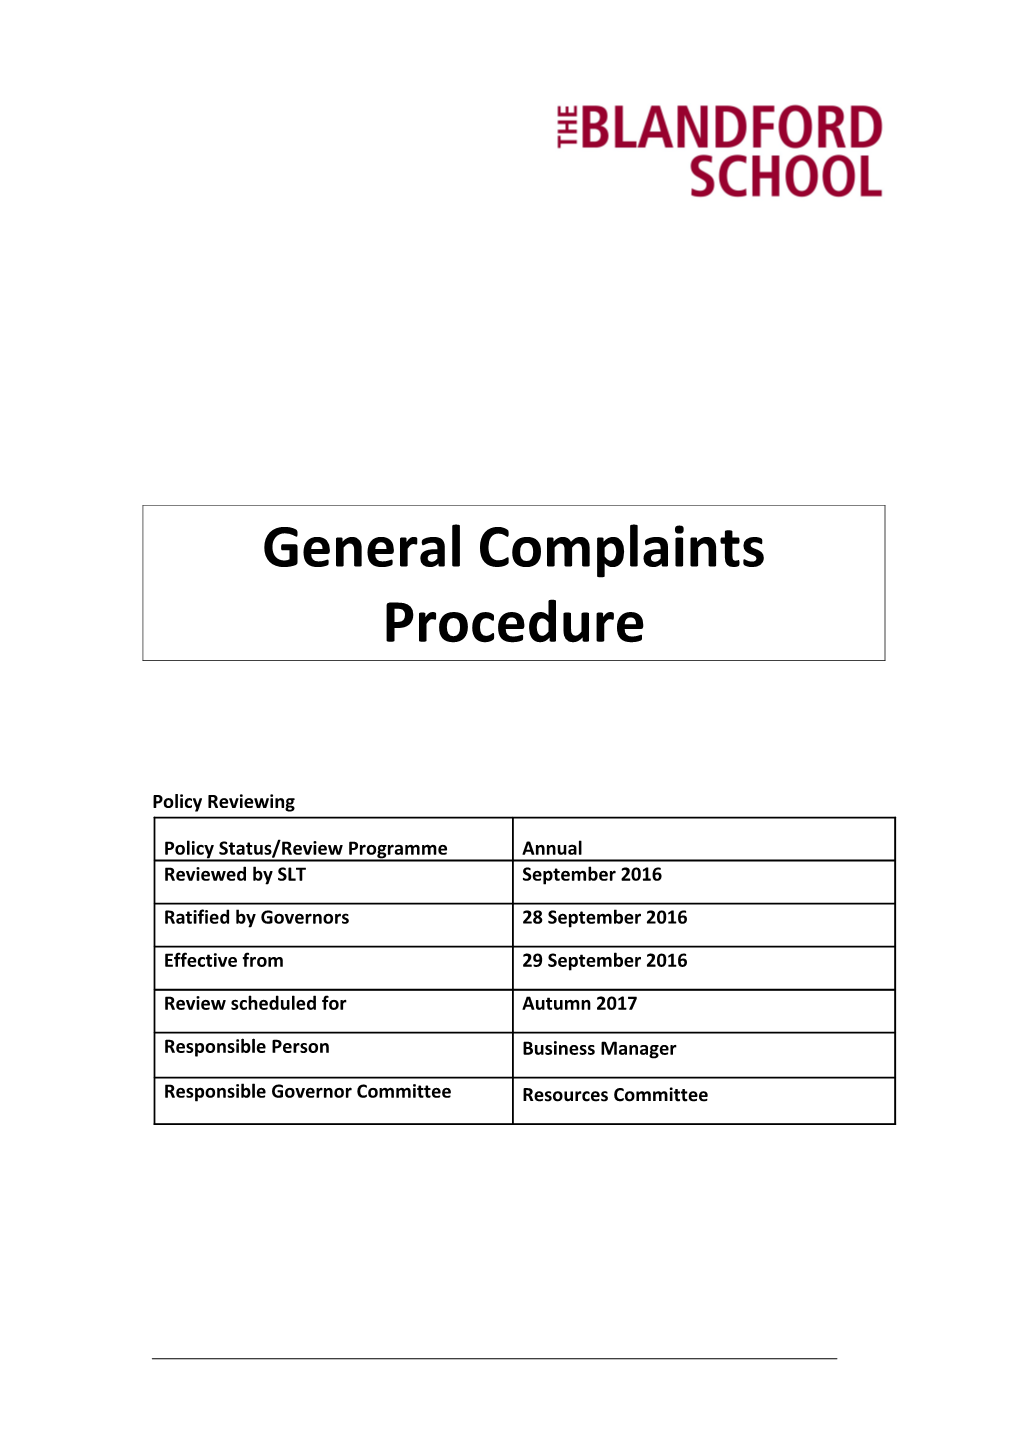 Framework for Complaints Policy